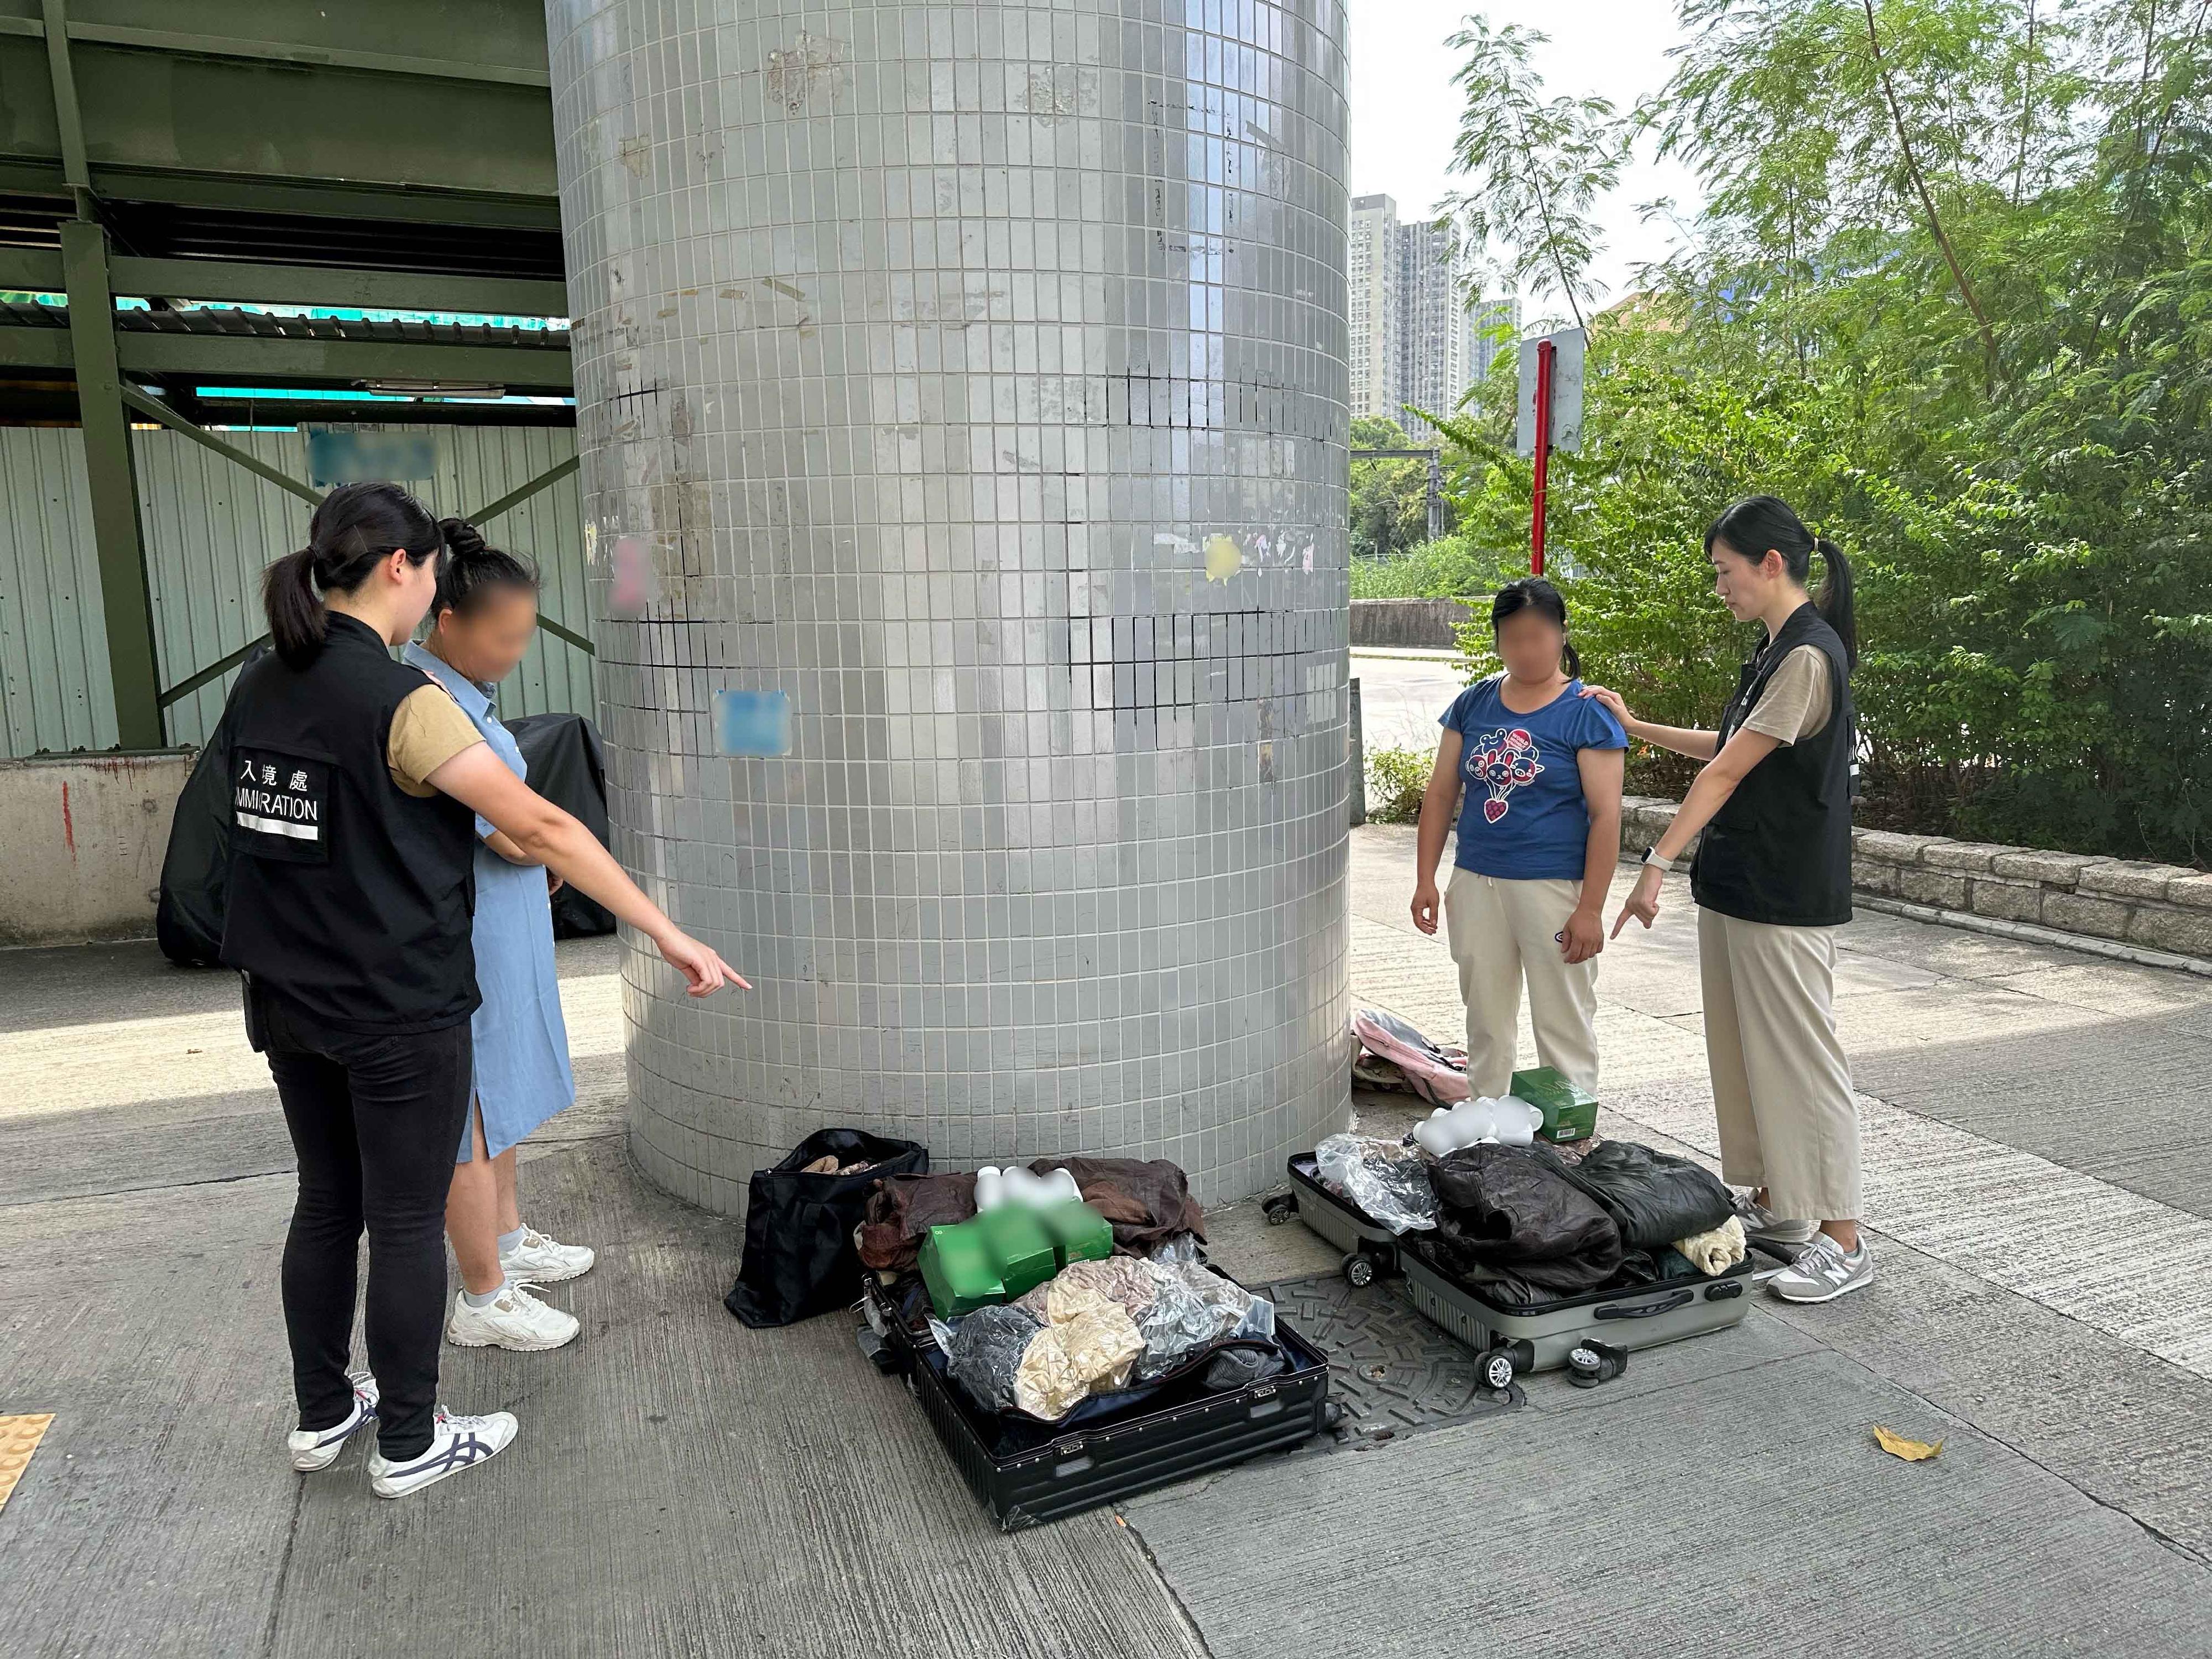 The Immigration Department mounted a series of territory-wide anti-illegal worker operations codenamed "Lightshadow" and "Twilight", and a joint operation with the Hong Kong Police Force codenamed "Windsand" for three consecutive days from October 3 to yesterday (October 5). Photo shows Mainland visitors involved in suspected parallel trading activities and their goods.